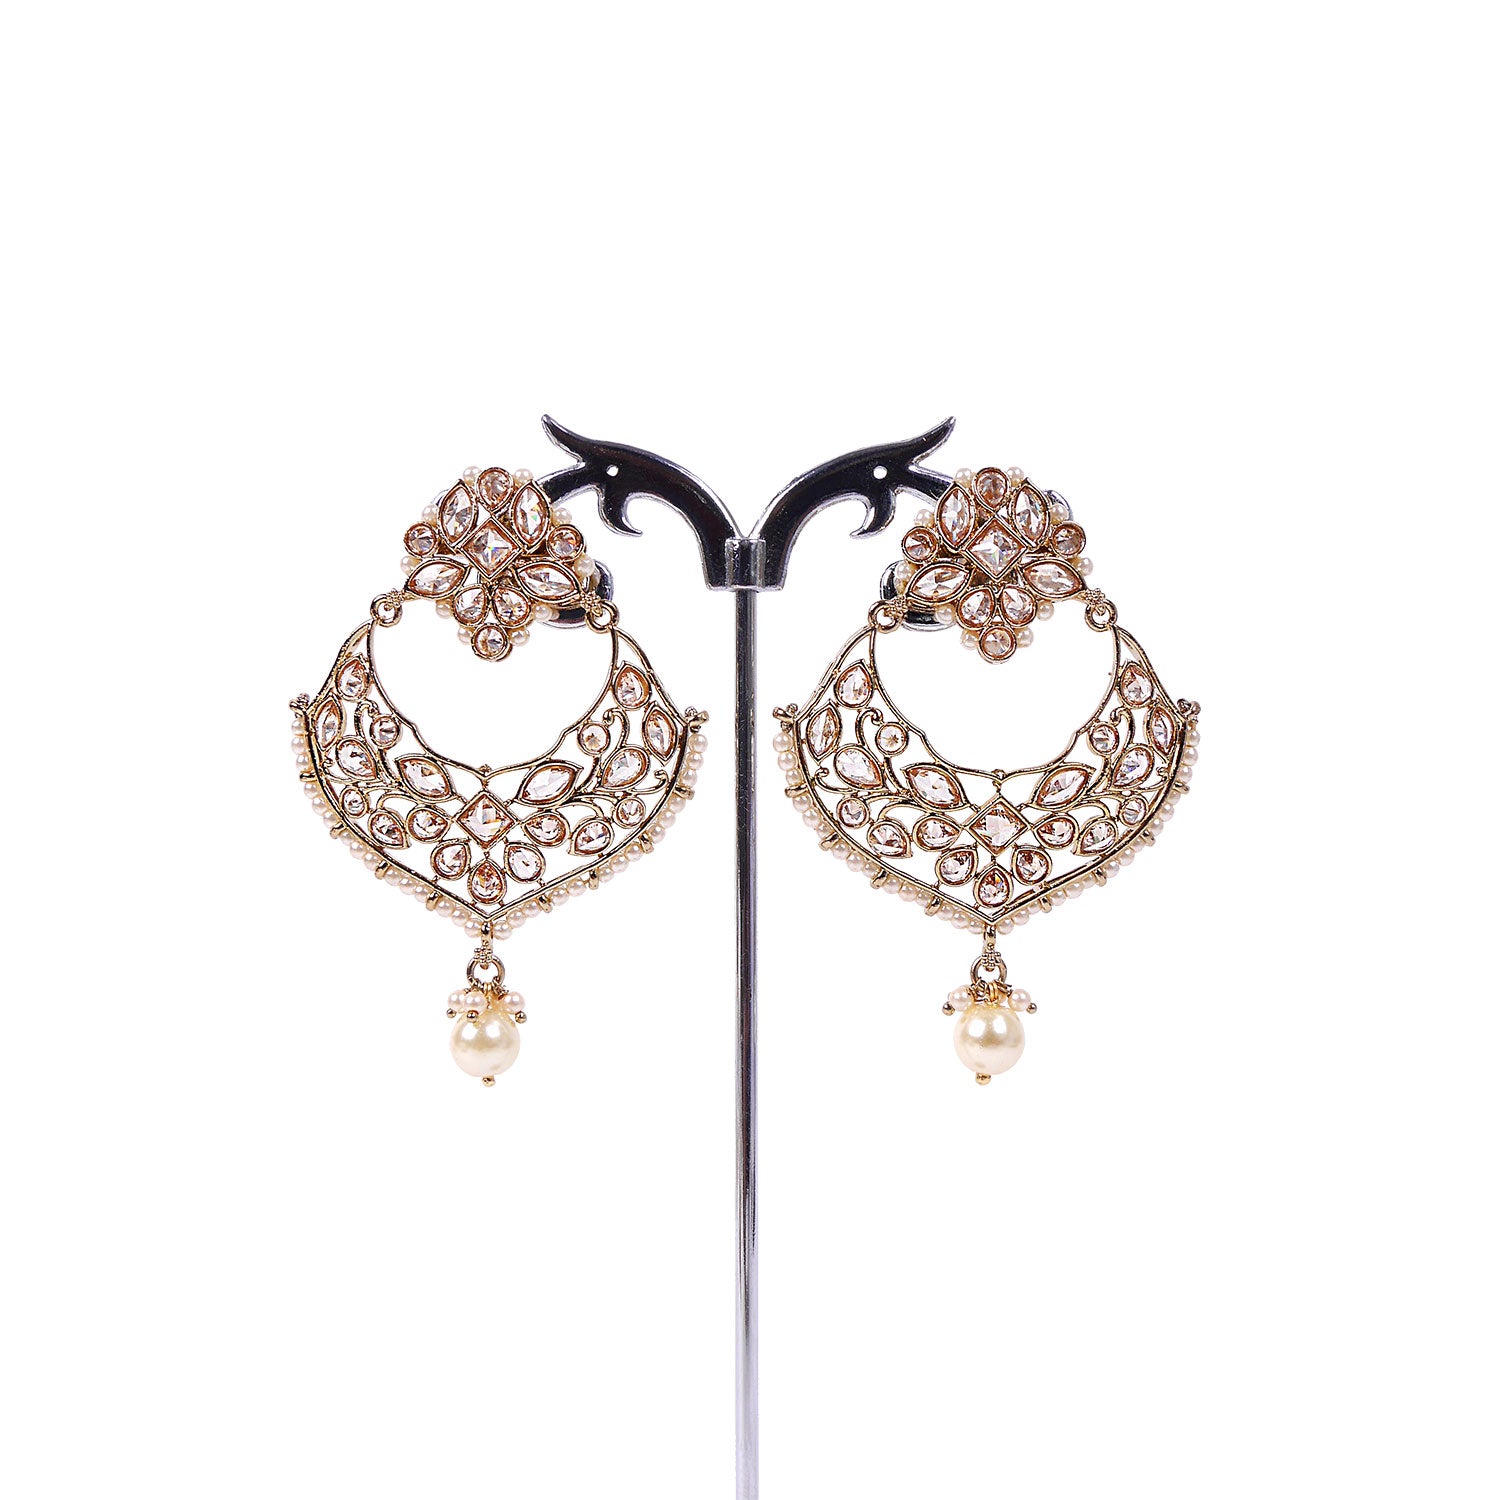 Richa Chandbali Earrings in Pearl and Antique Gold